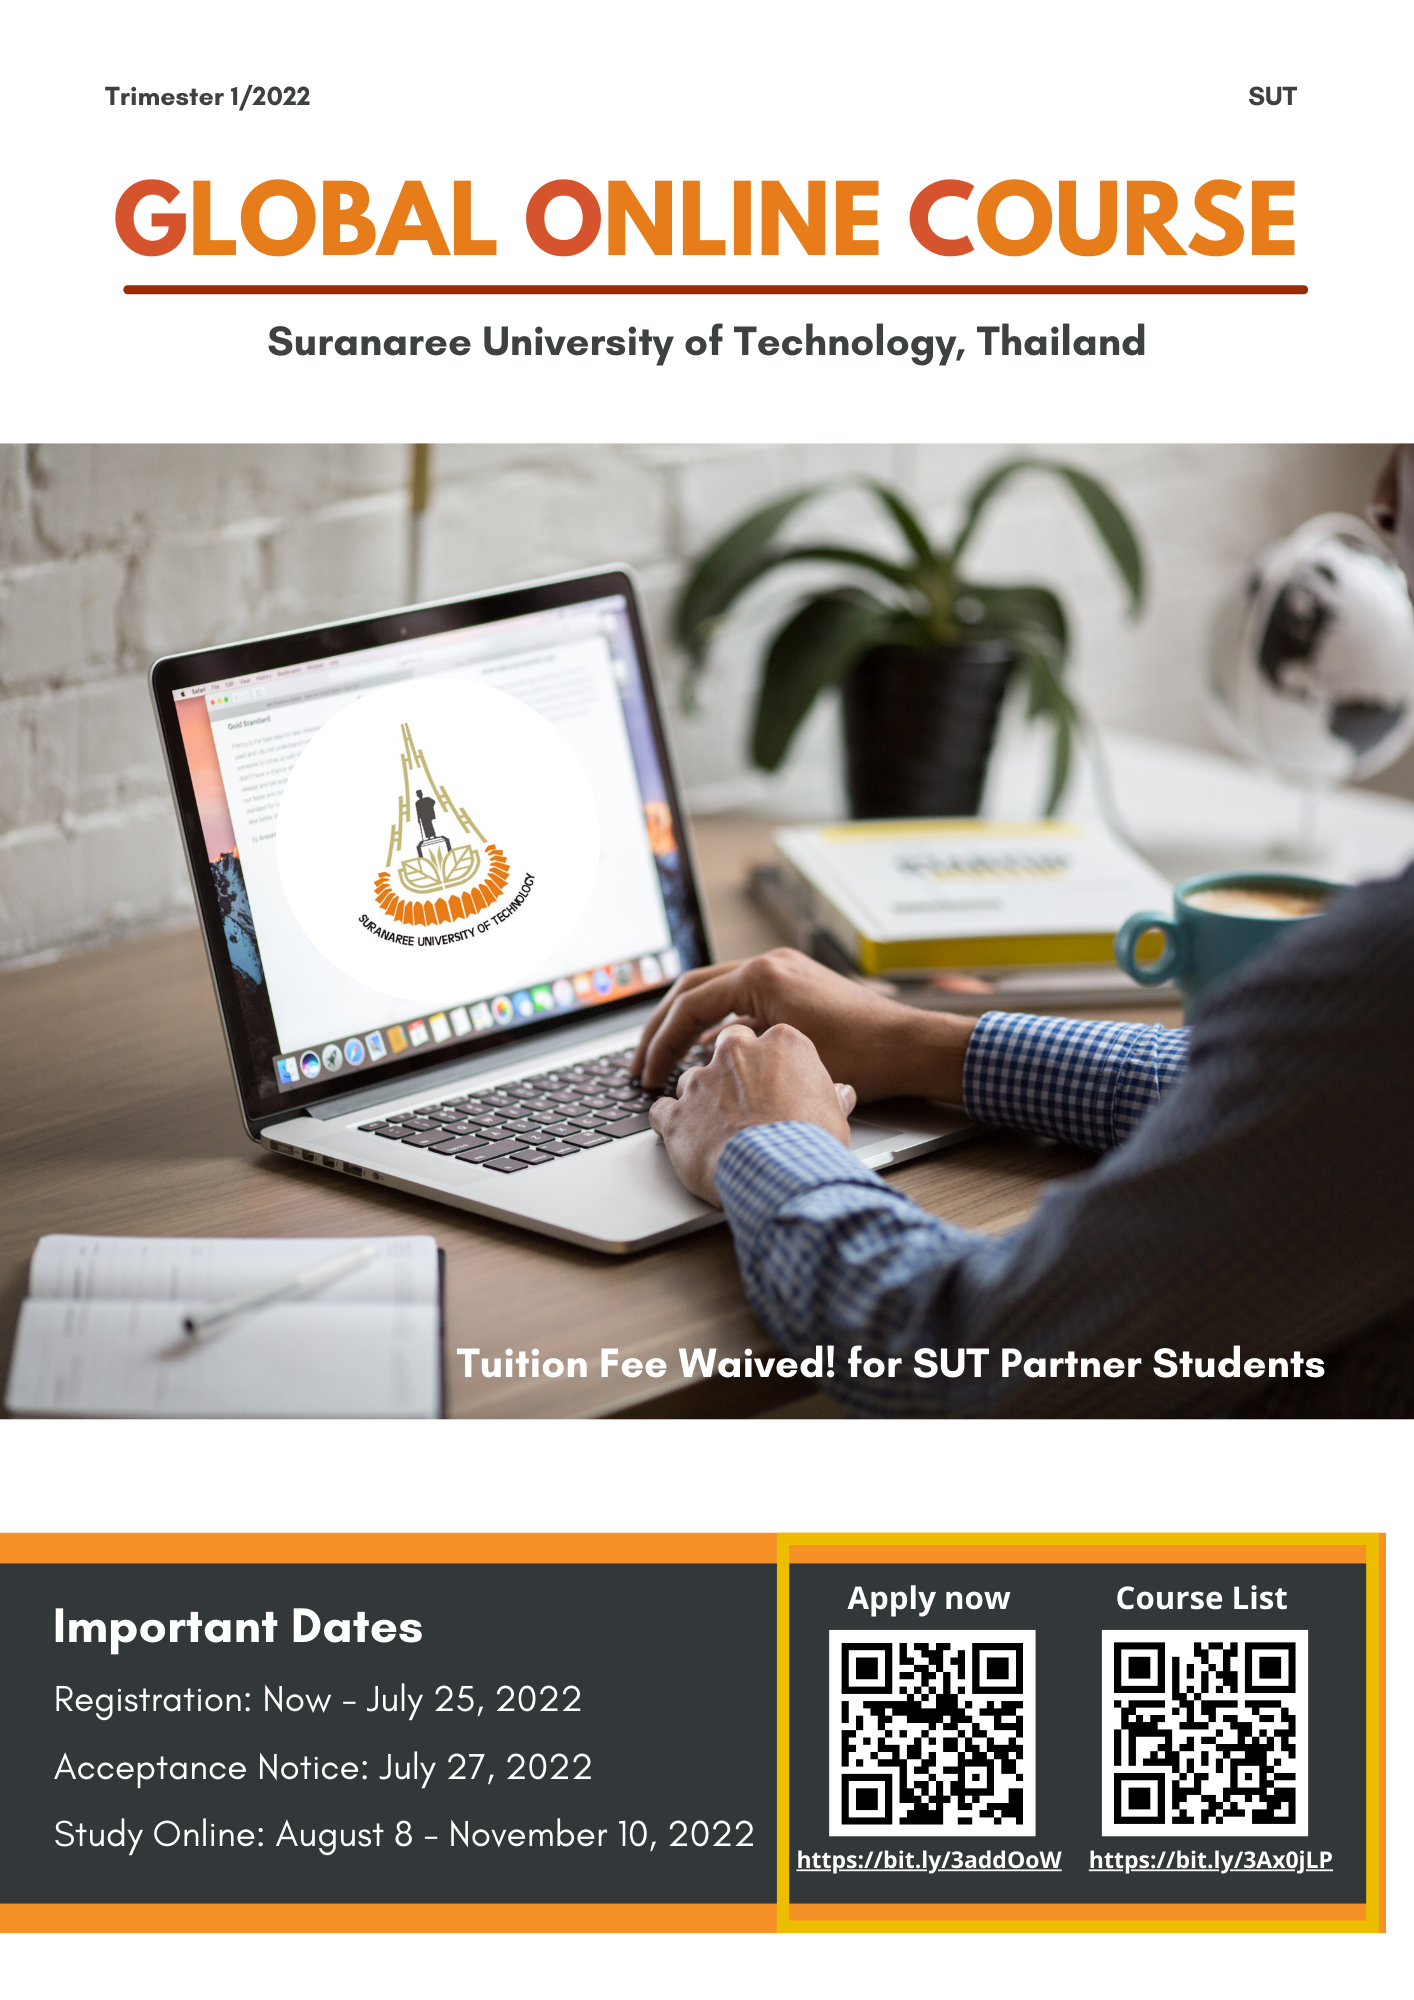 CALL FOR STUDENTS’ PARTICIPATION > SUT GLOBAL ONLINE COURSE TRIMESTER 1/2022